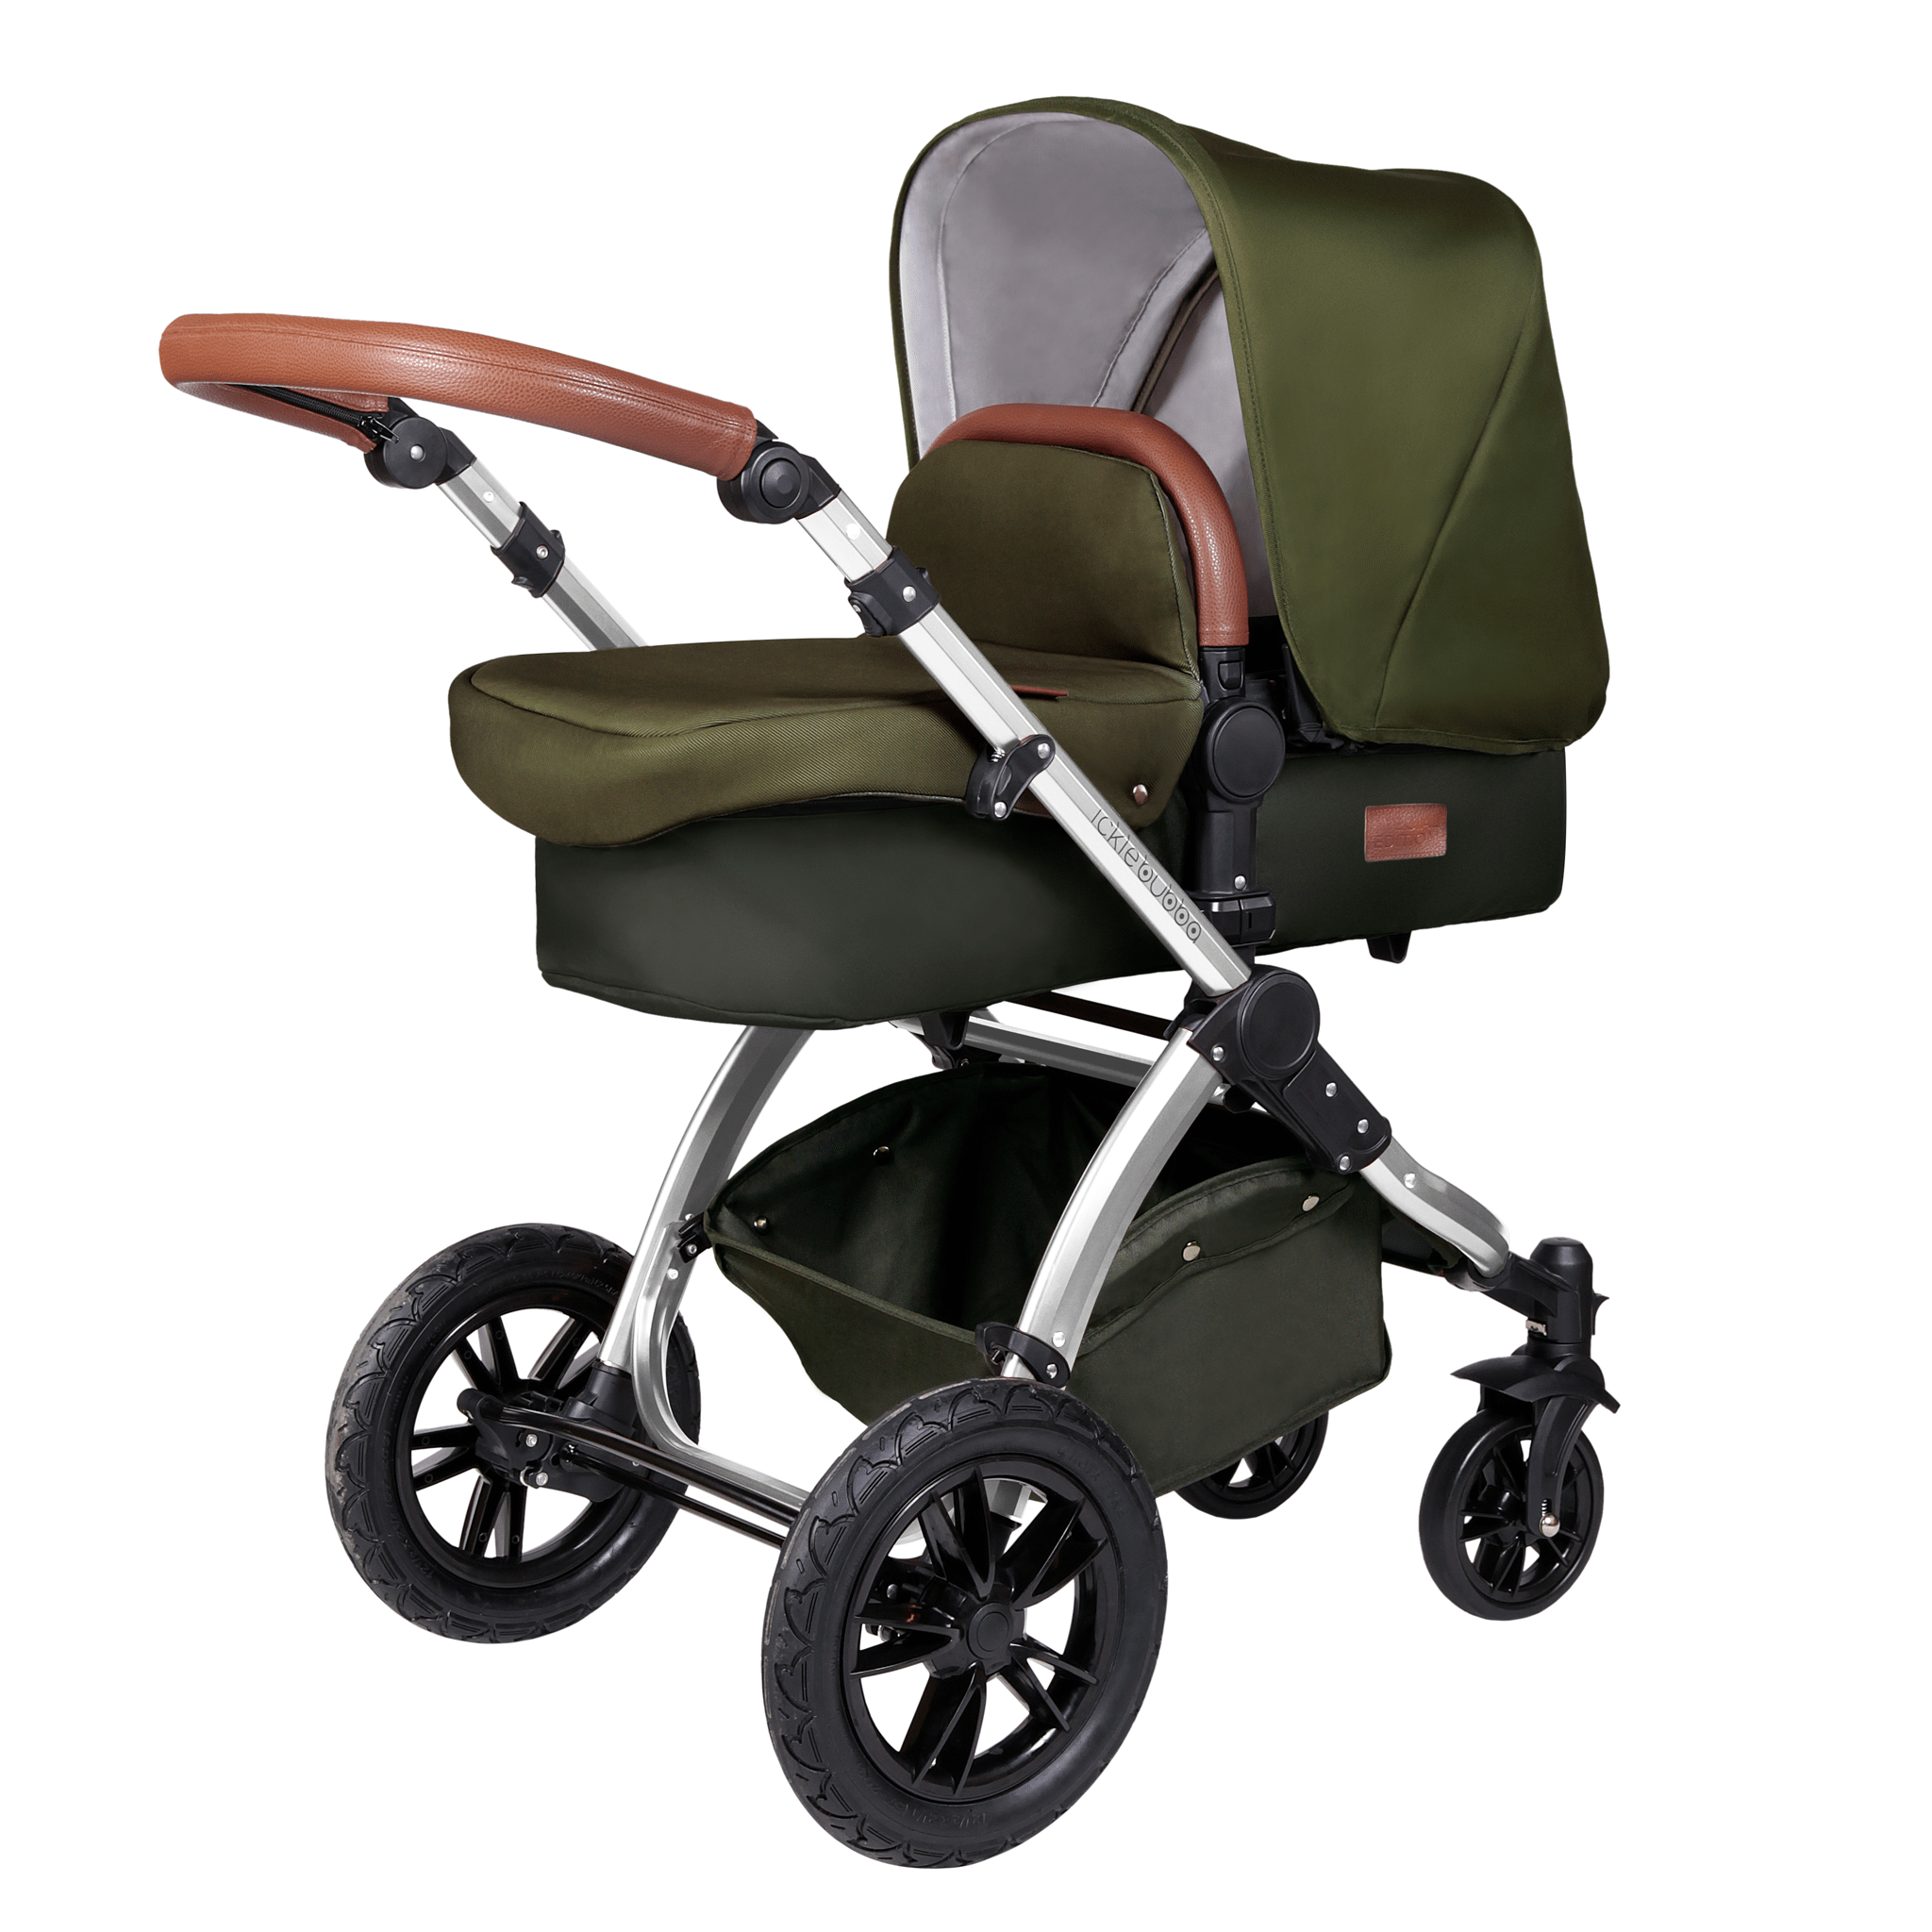 Ickle Bubba Stomp V4 2-in-1 Pushchair Chrome/Woodland Pushchairs & Buggies 10-004-000-029 0709016518768